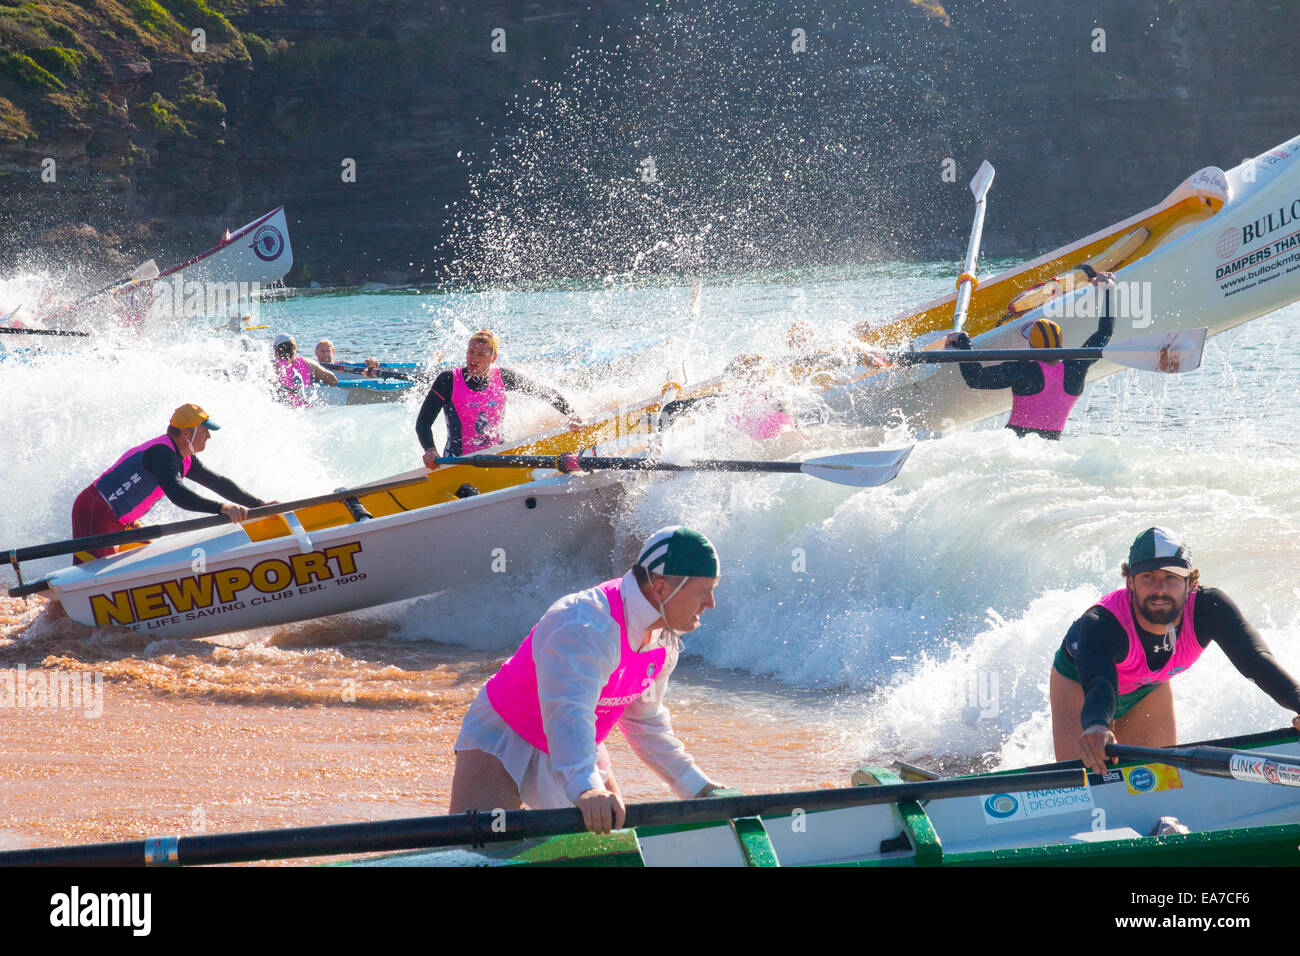 Sydney, Australia. 8th Nov, 2014. Summer surfboat racing competition amongst surfclubs located on Sydney's northern beaches begins at Bilgola Beach. teams launch surfboat Australia Credit:  martin berry/Alamy Live News Stock Photo